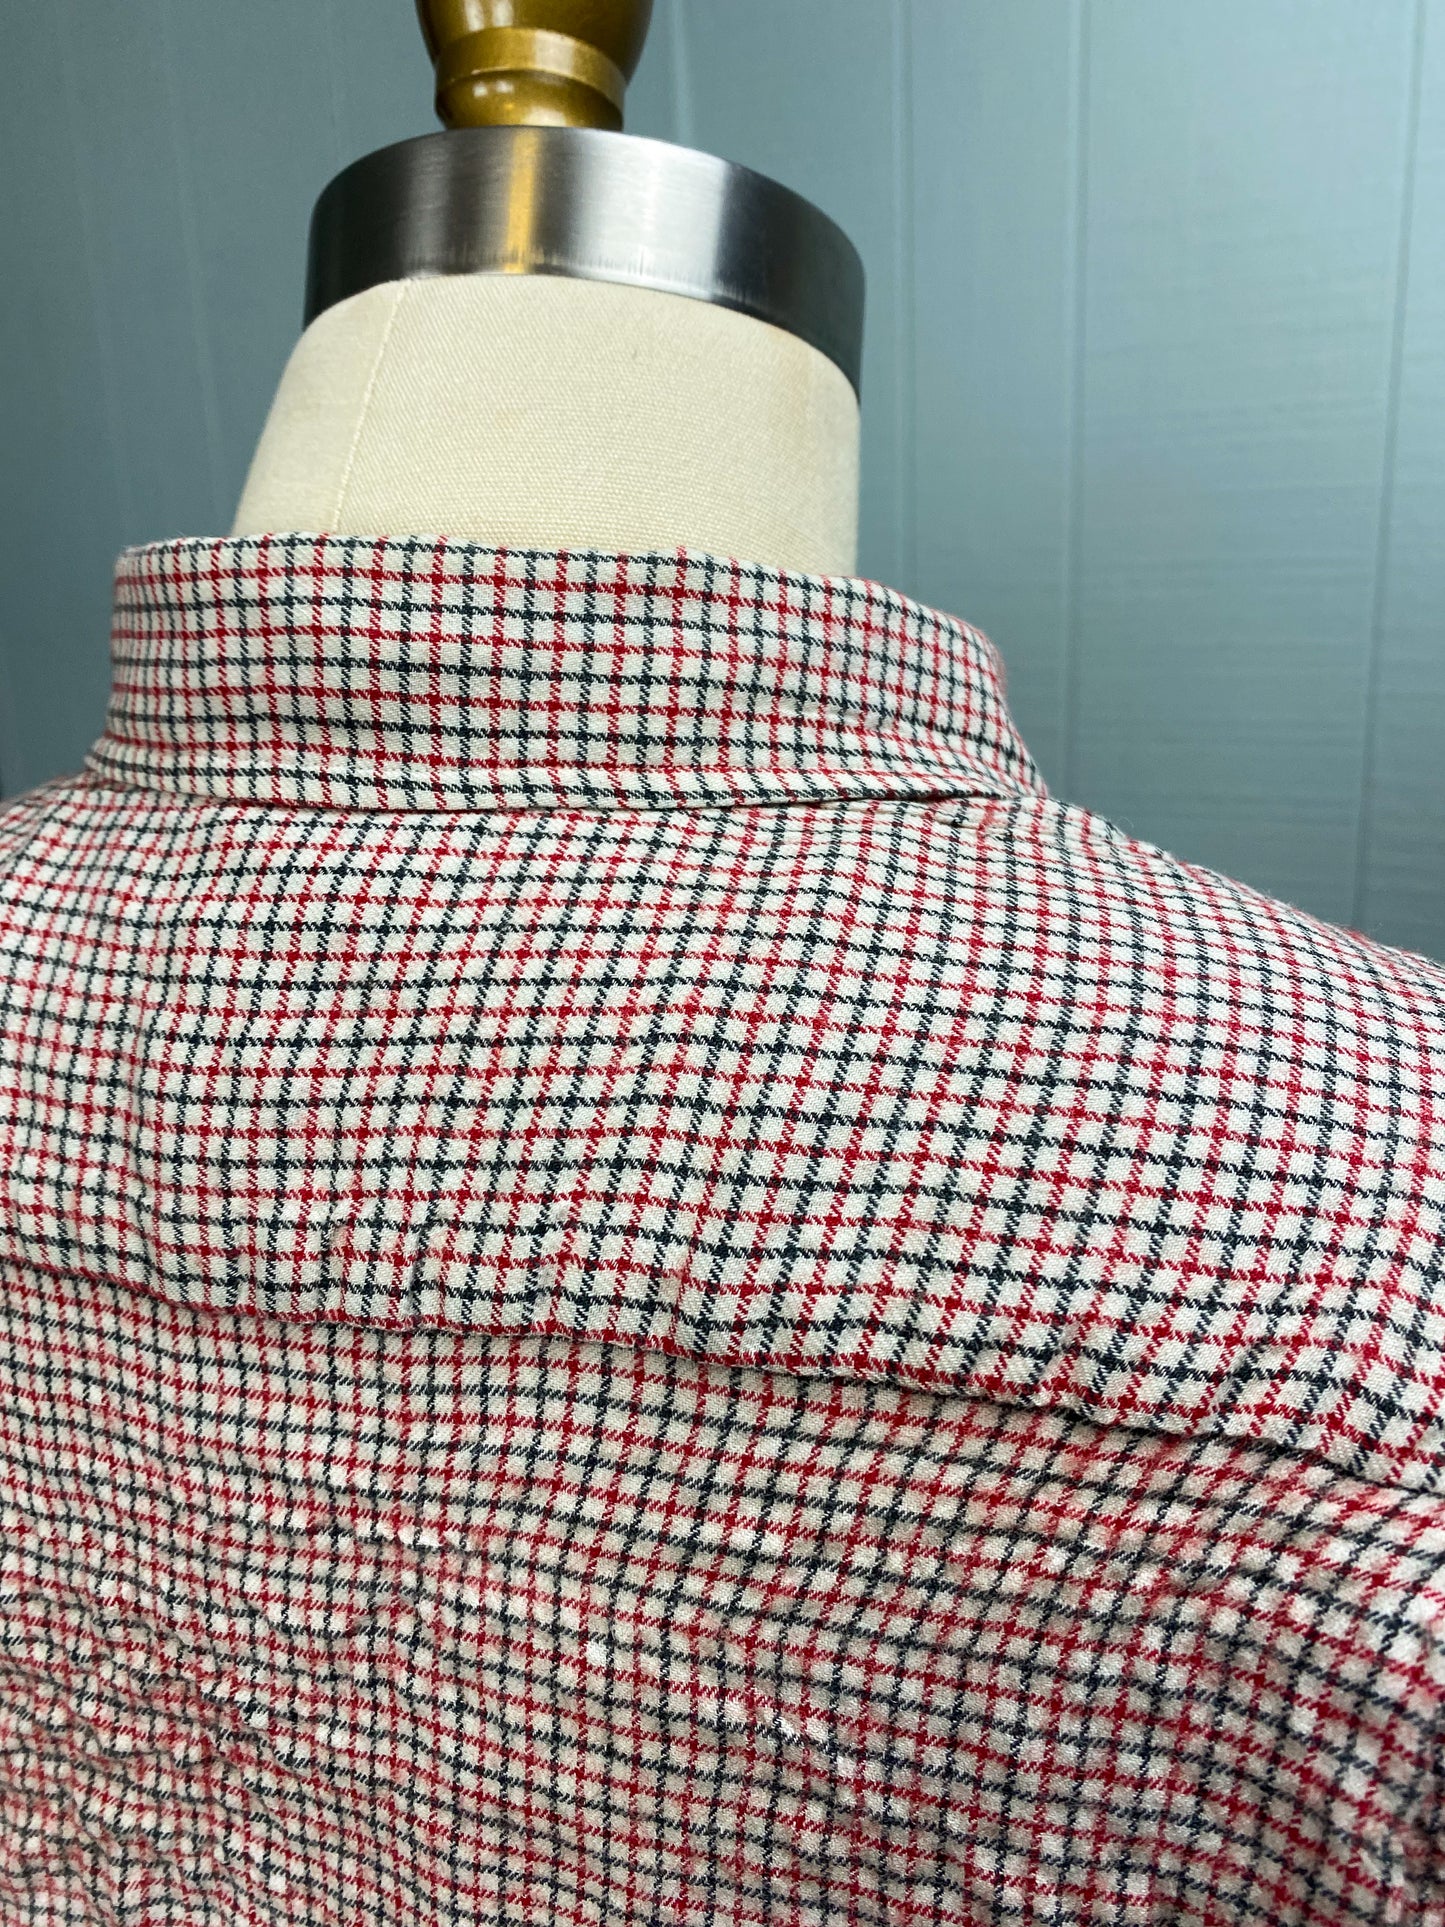 50s Suissella Brushed Cotton Windowpane Button Down Shirt | M/L